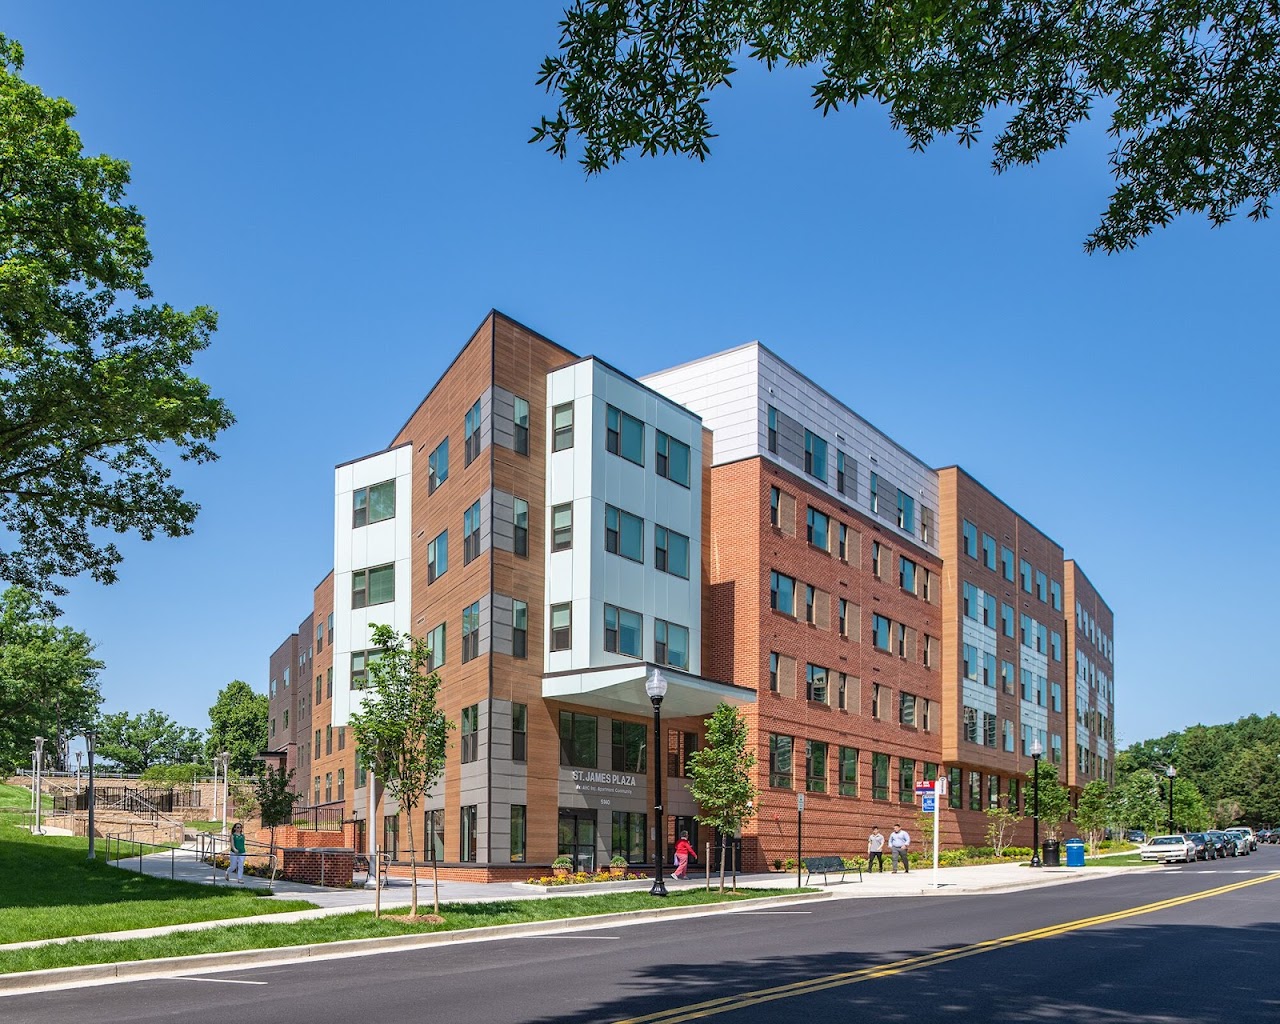 Photo of ST. JAMES PLAZA. Affordable housing located at 5140 FILLMORE AVENUE ALEXANDRIA, VA 22311